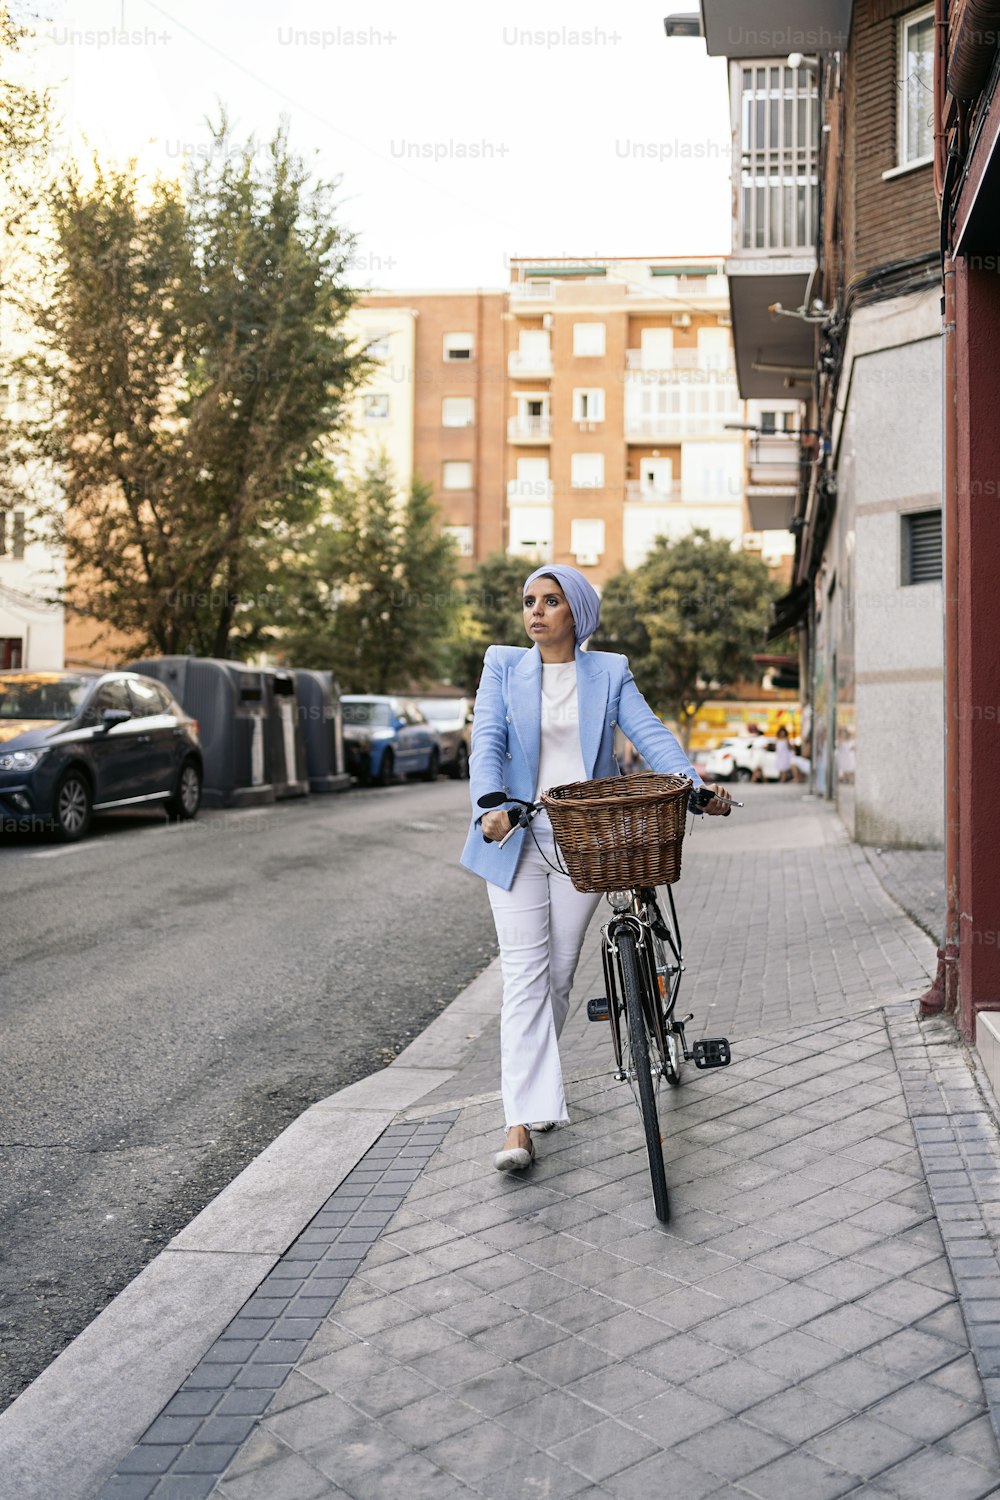 Vertical image of a muslim woman wearing a blue light suit and white pants walking with her bicycle